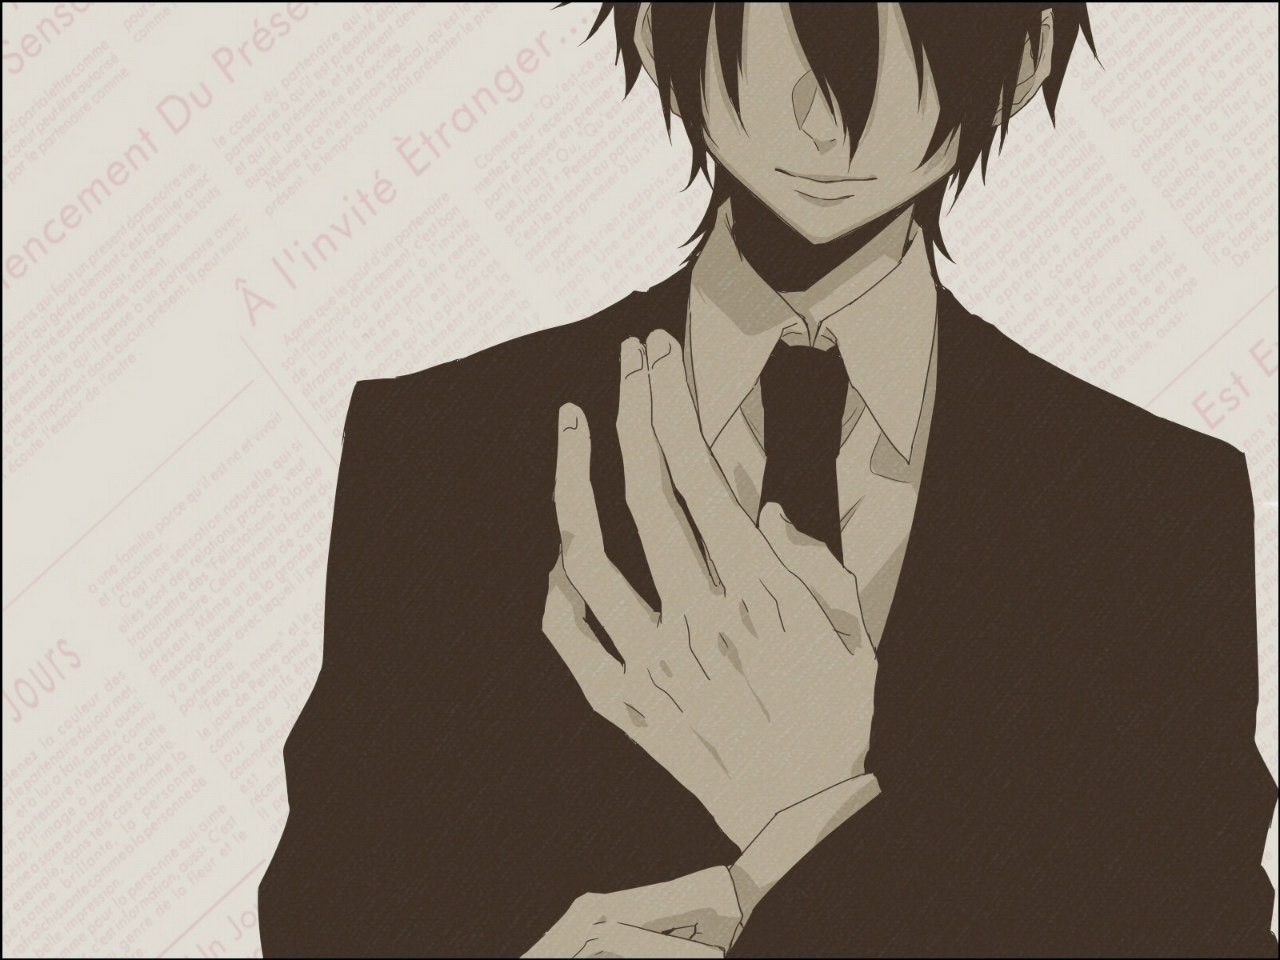 Anime 1280x960 manga anime anime boys suits tie simple background hair in face white background hands